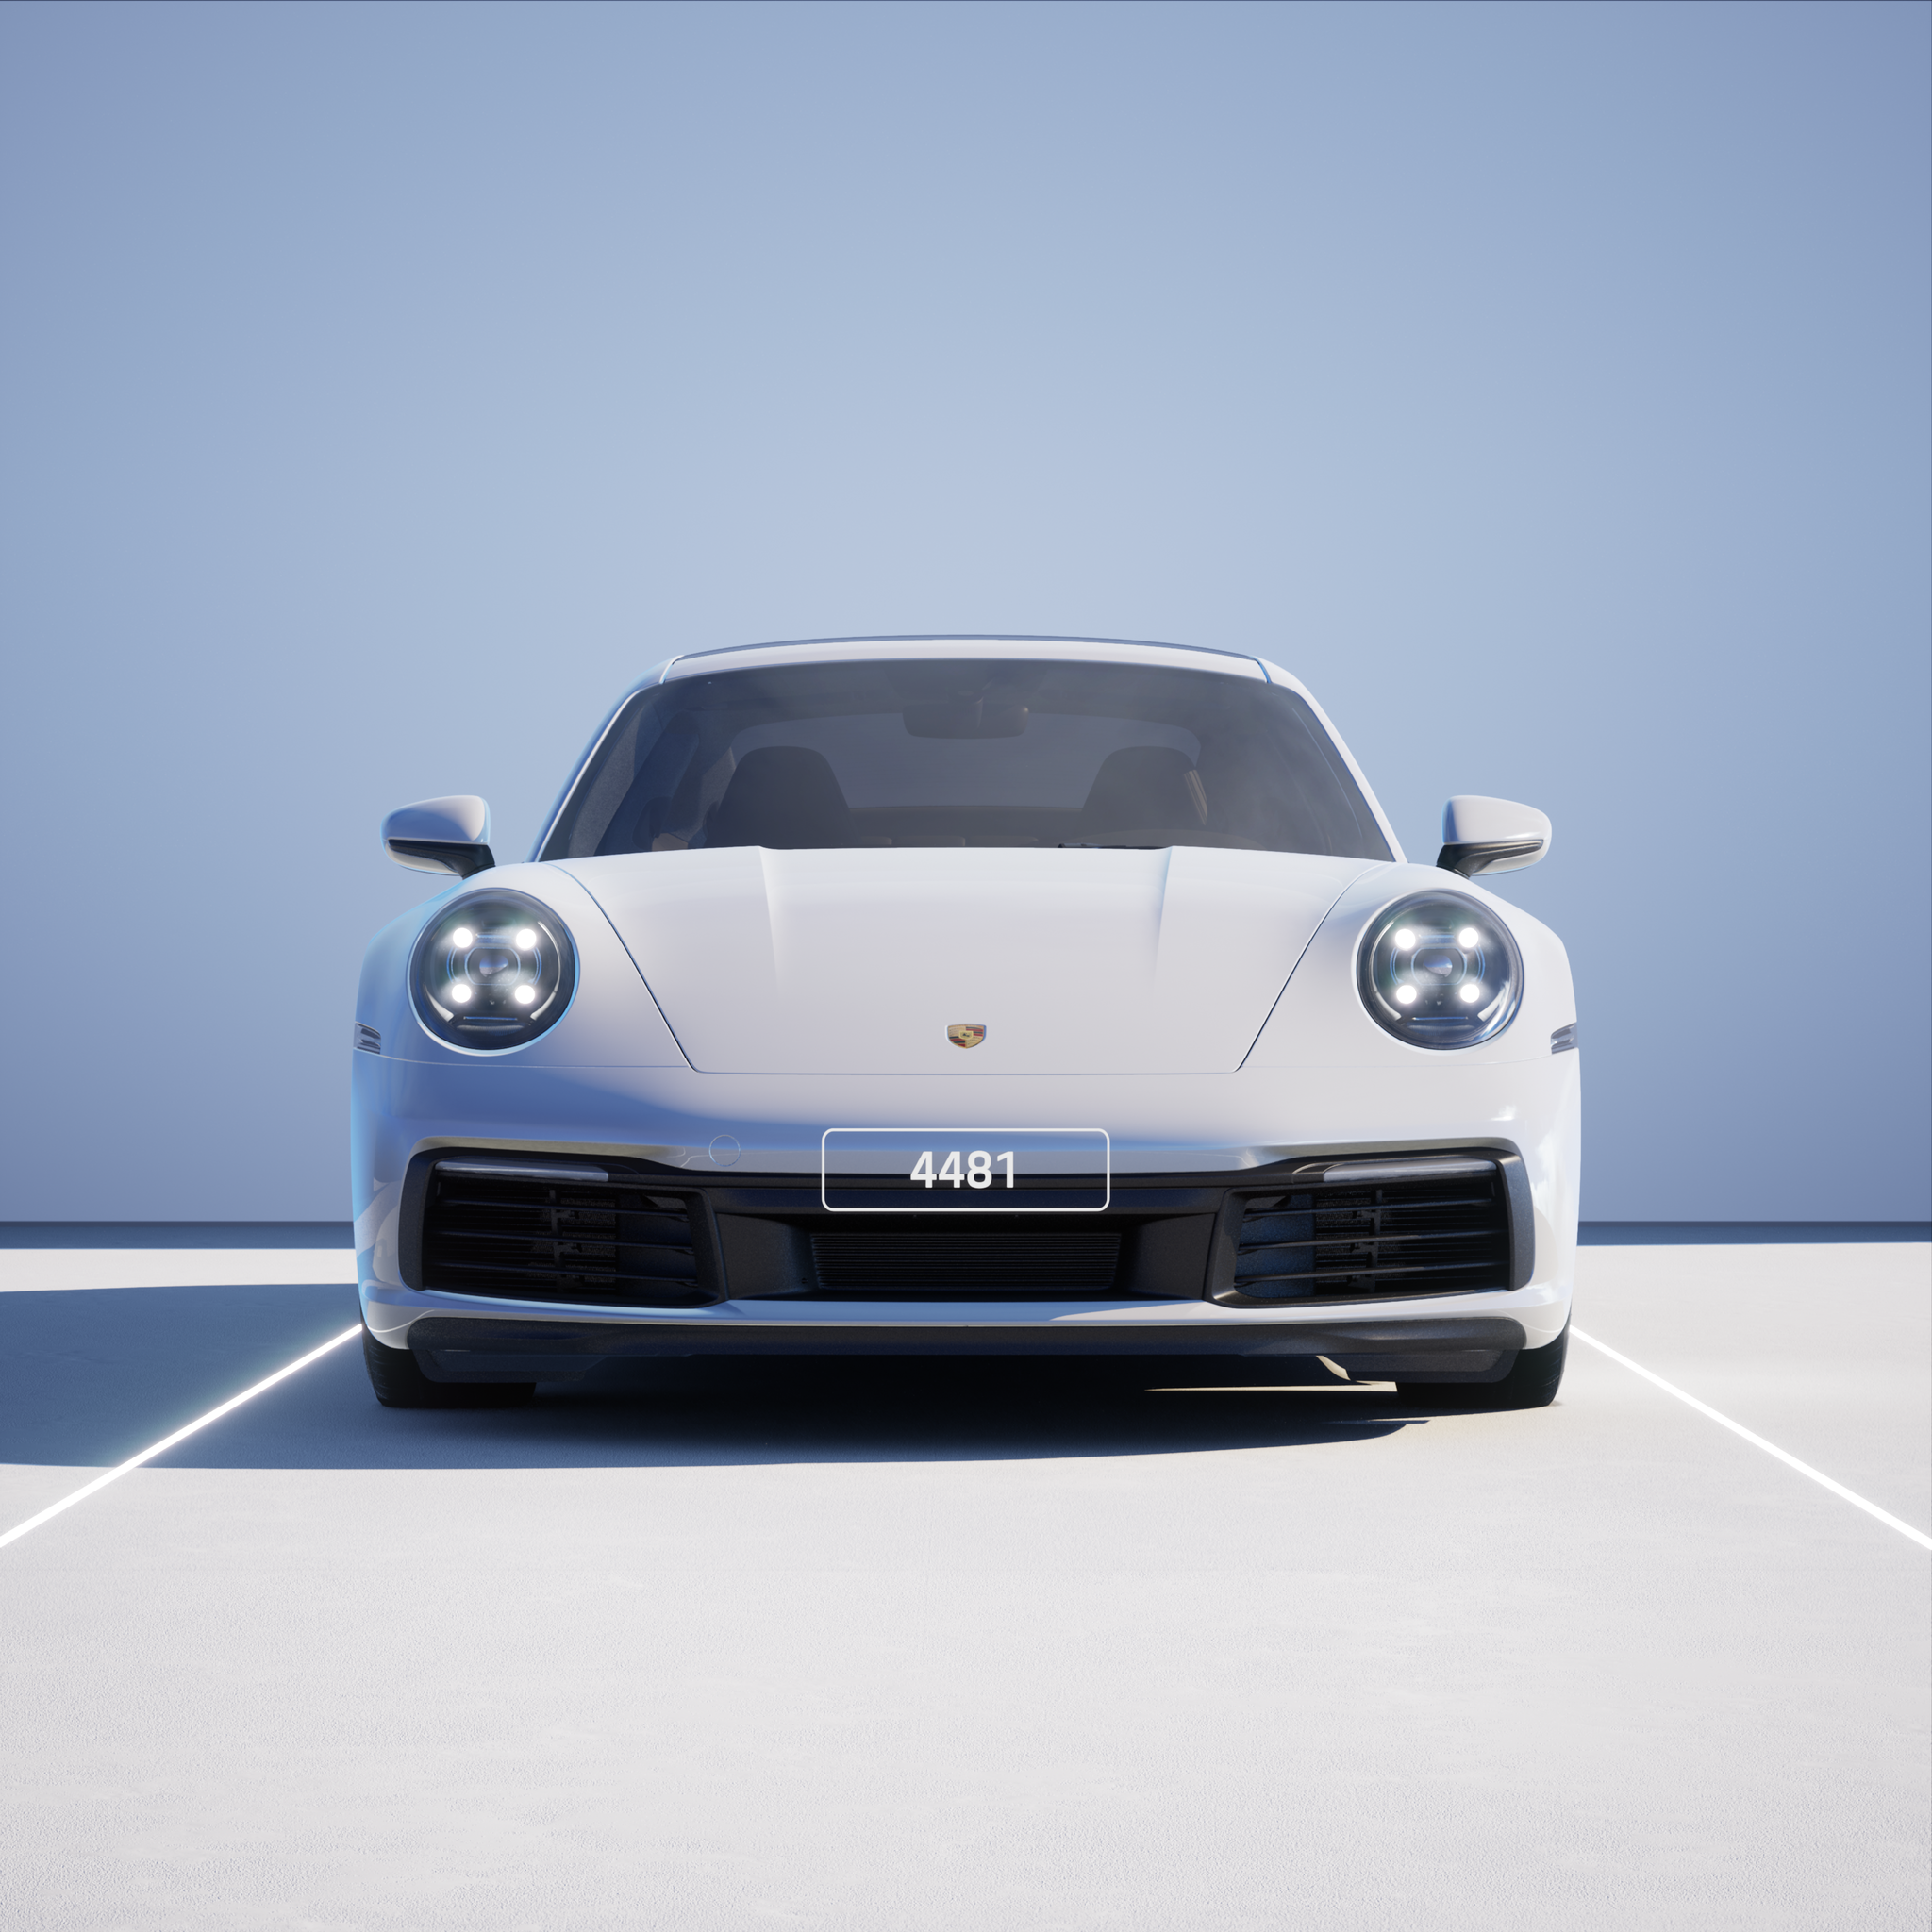 The PORSCHΞ 911 4481 image in phase